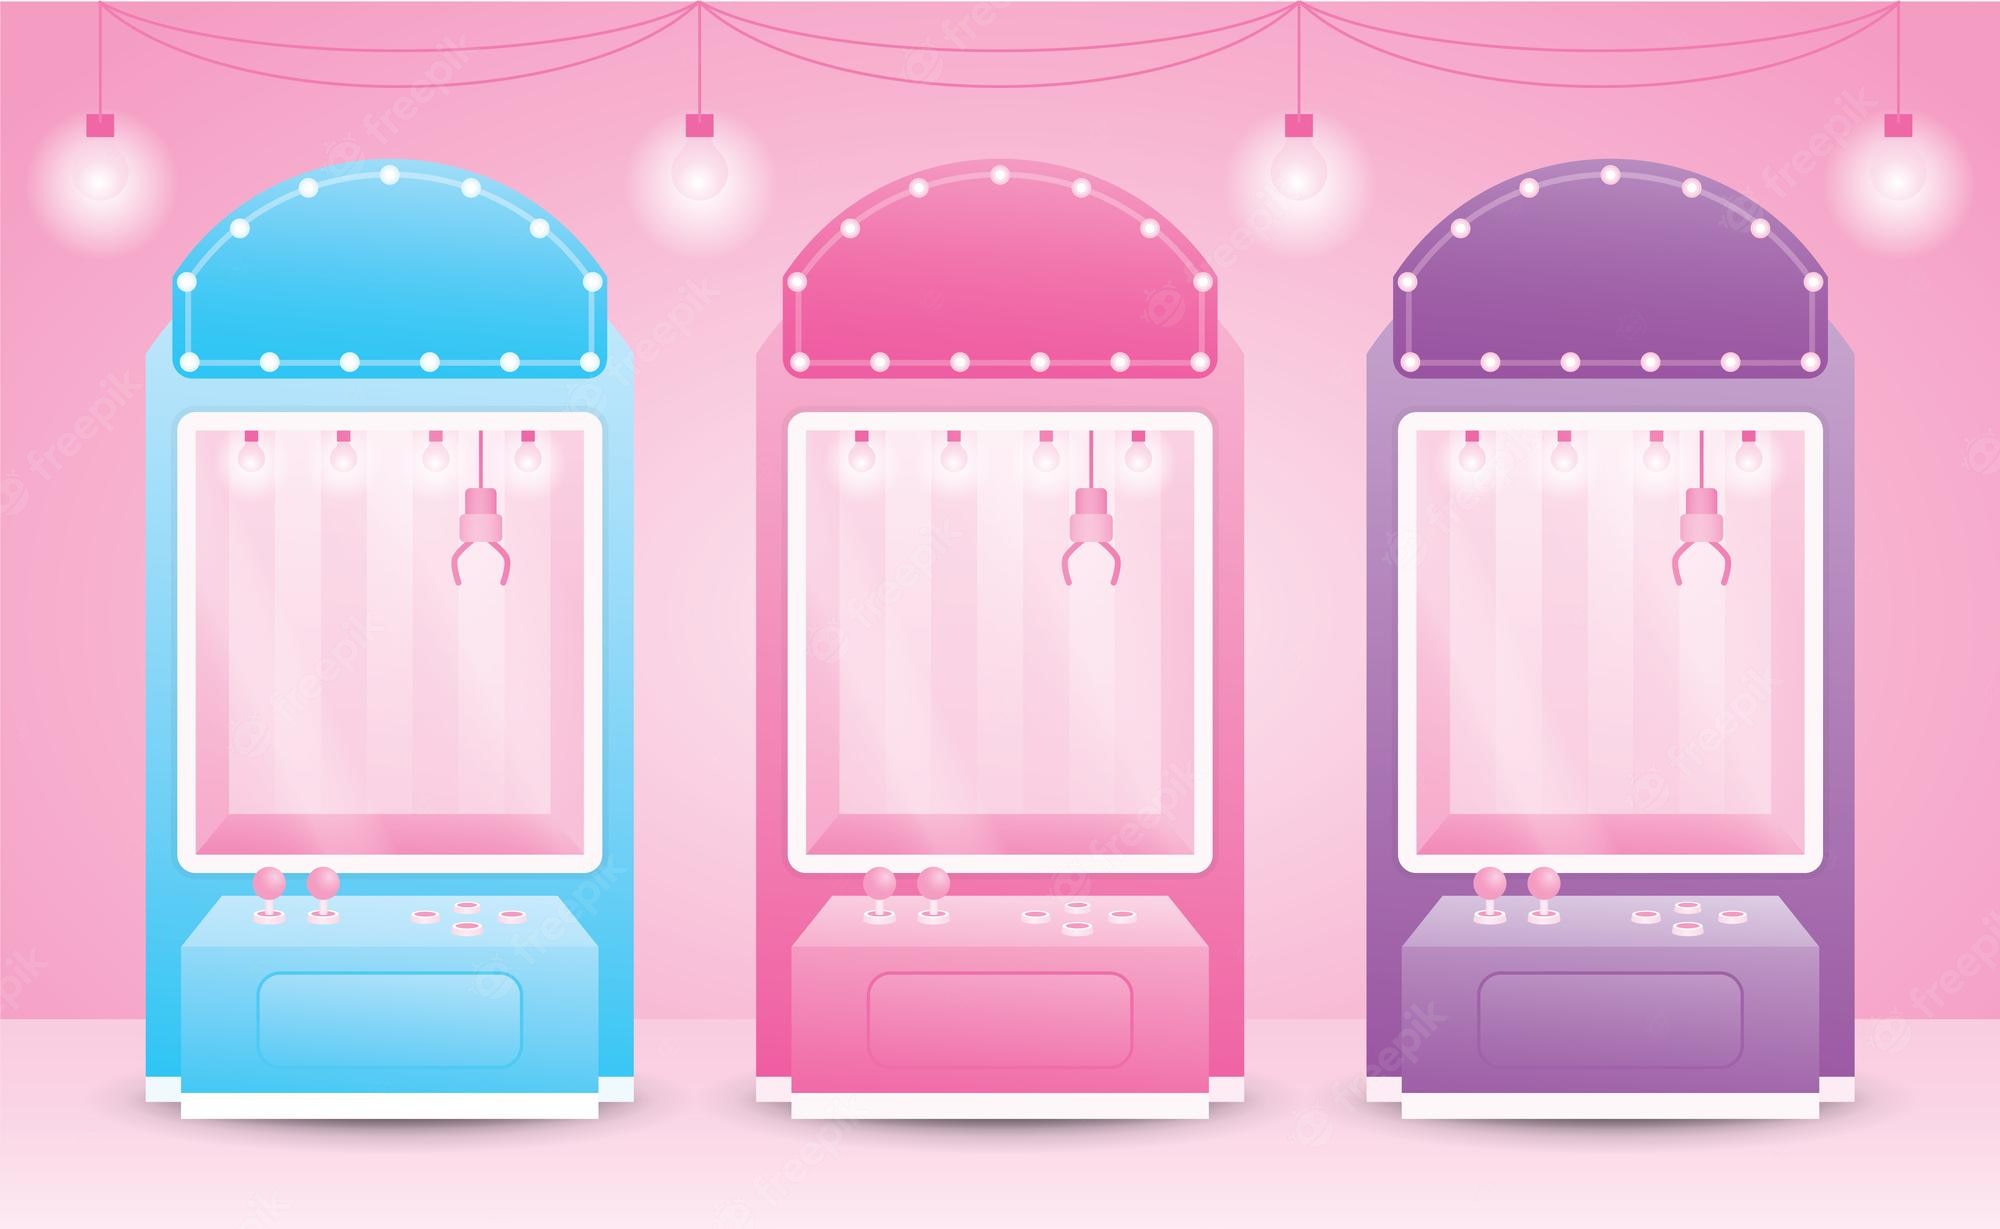 Toy Claw Machine Image. Free Vectors, & PSD